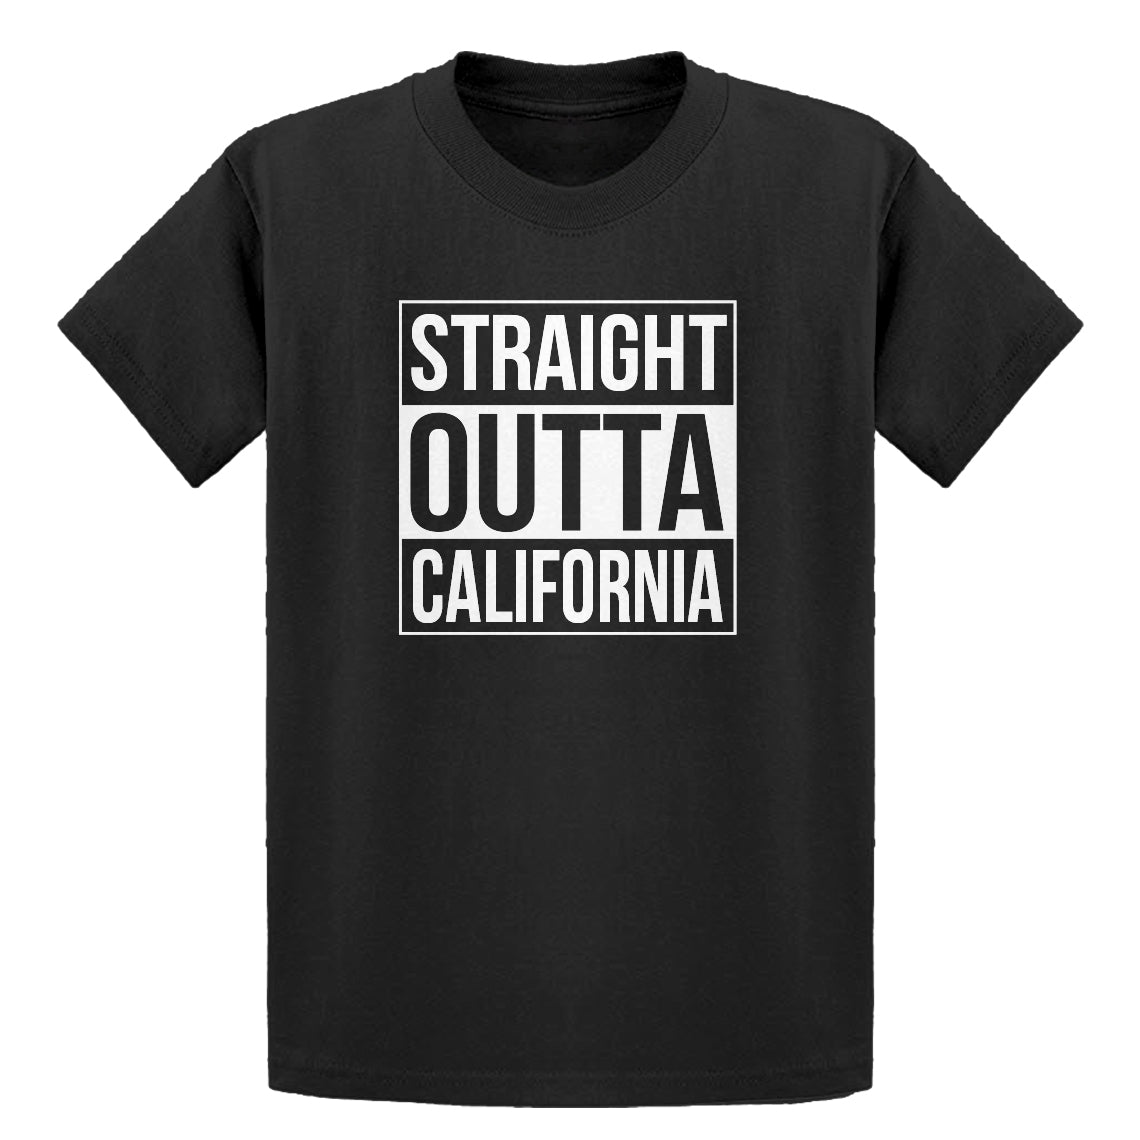 Youth Straight Outta California Kids T-shirt